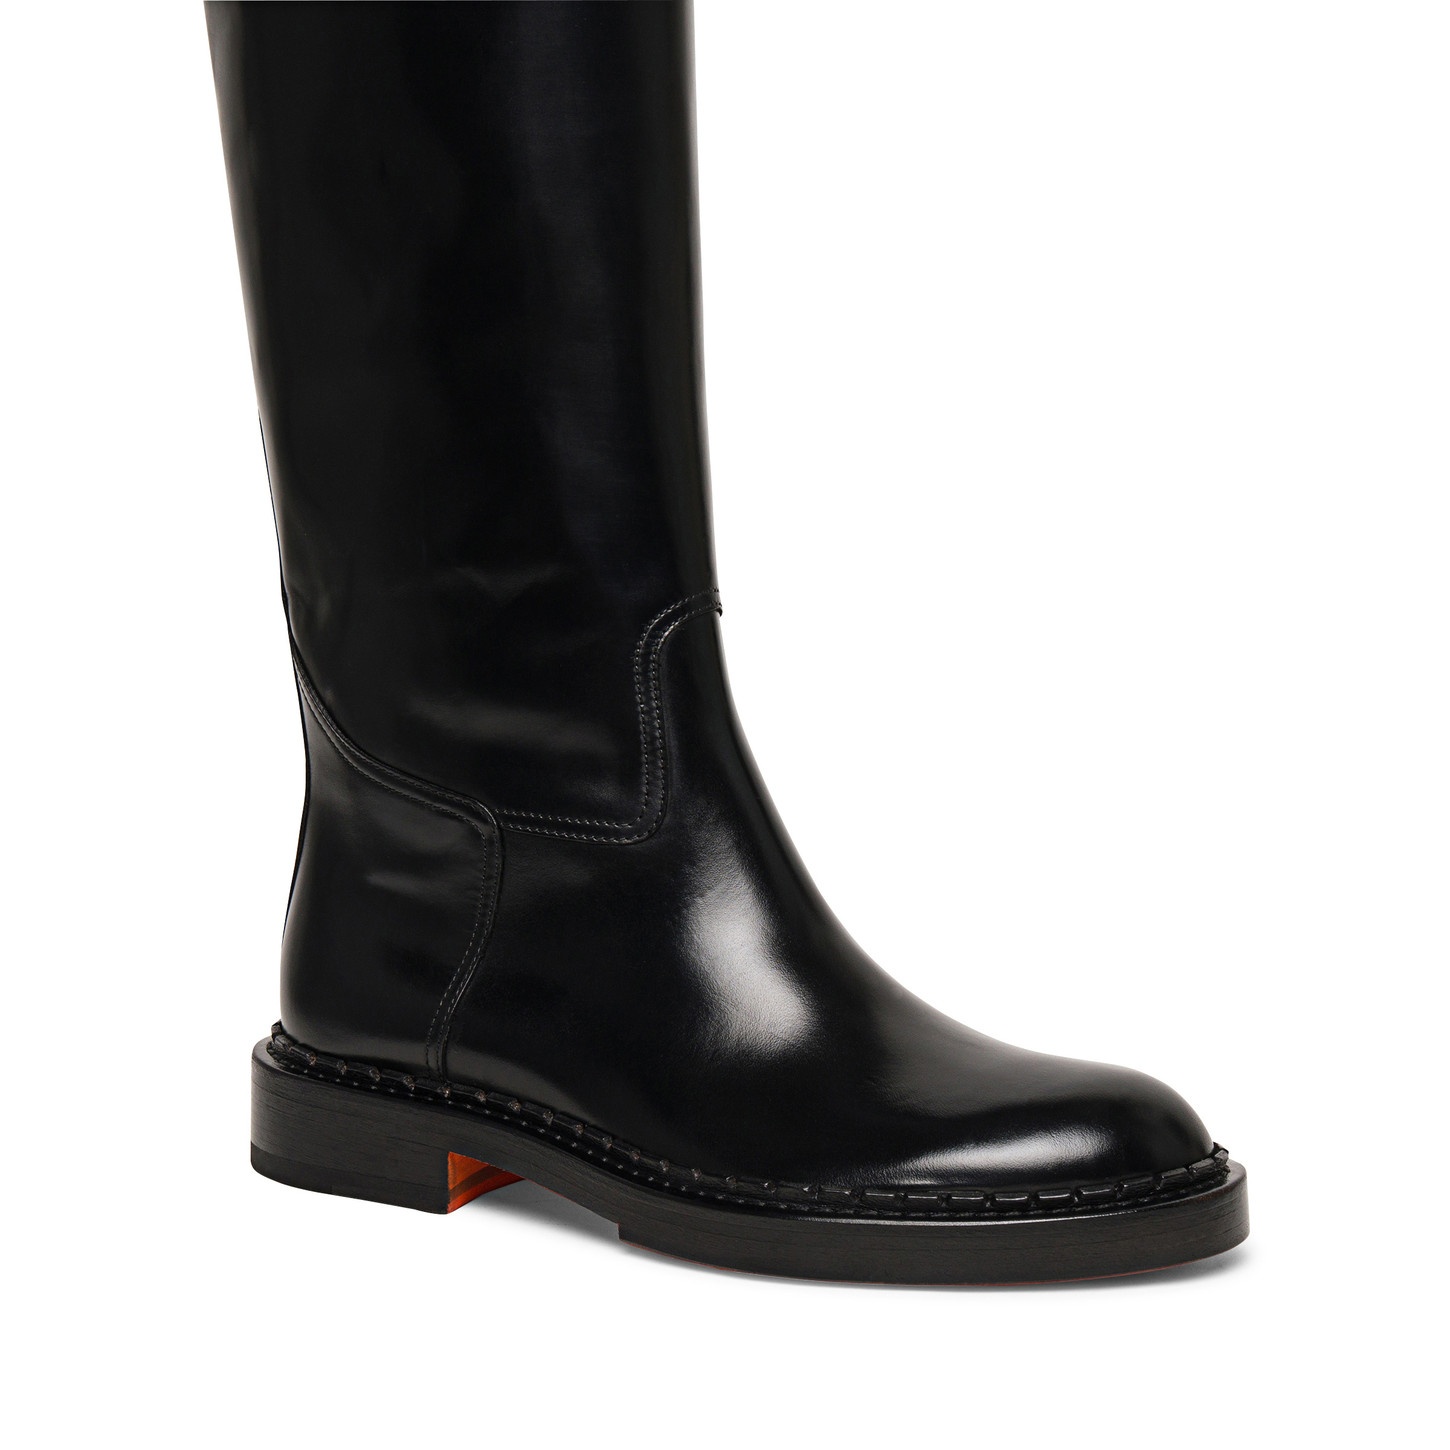 Women’s black leather boot - 5